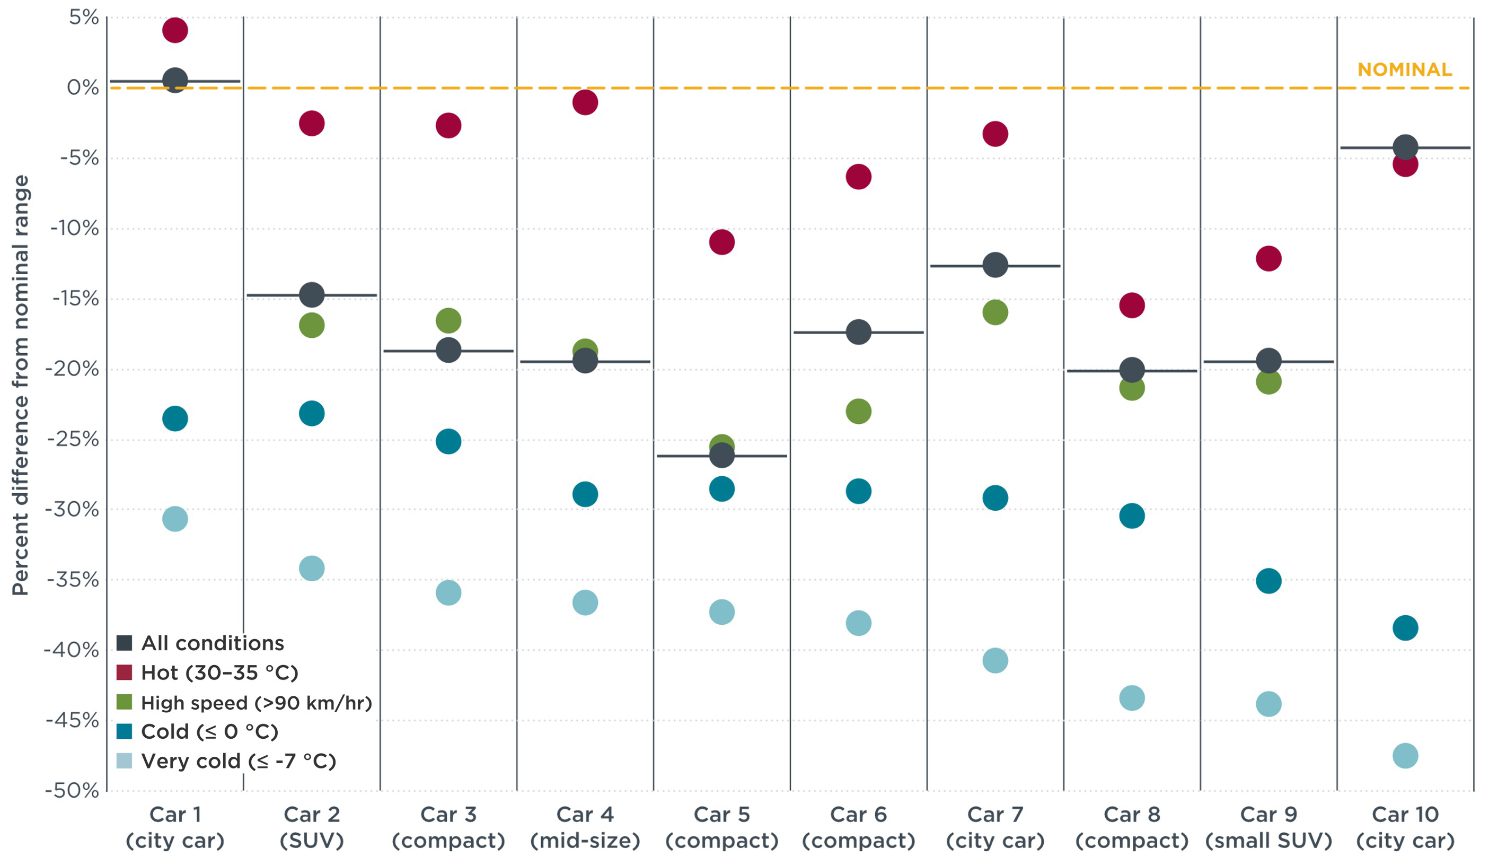 Chart illustrates the percent difference between real-world range and the nominal value for range for each car in the sample with dots representing “all conditions” in gray and dots for “very cold” in light blue, “cold” in darker blue, “high speed” in green, and “hot” conditions in red. 